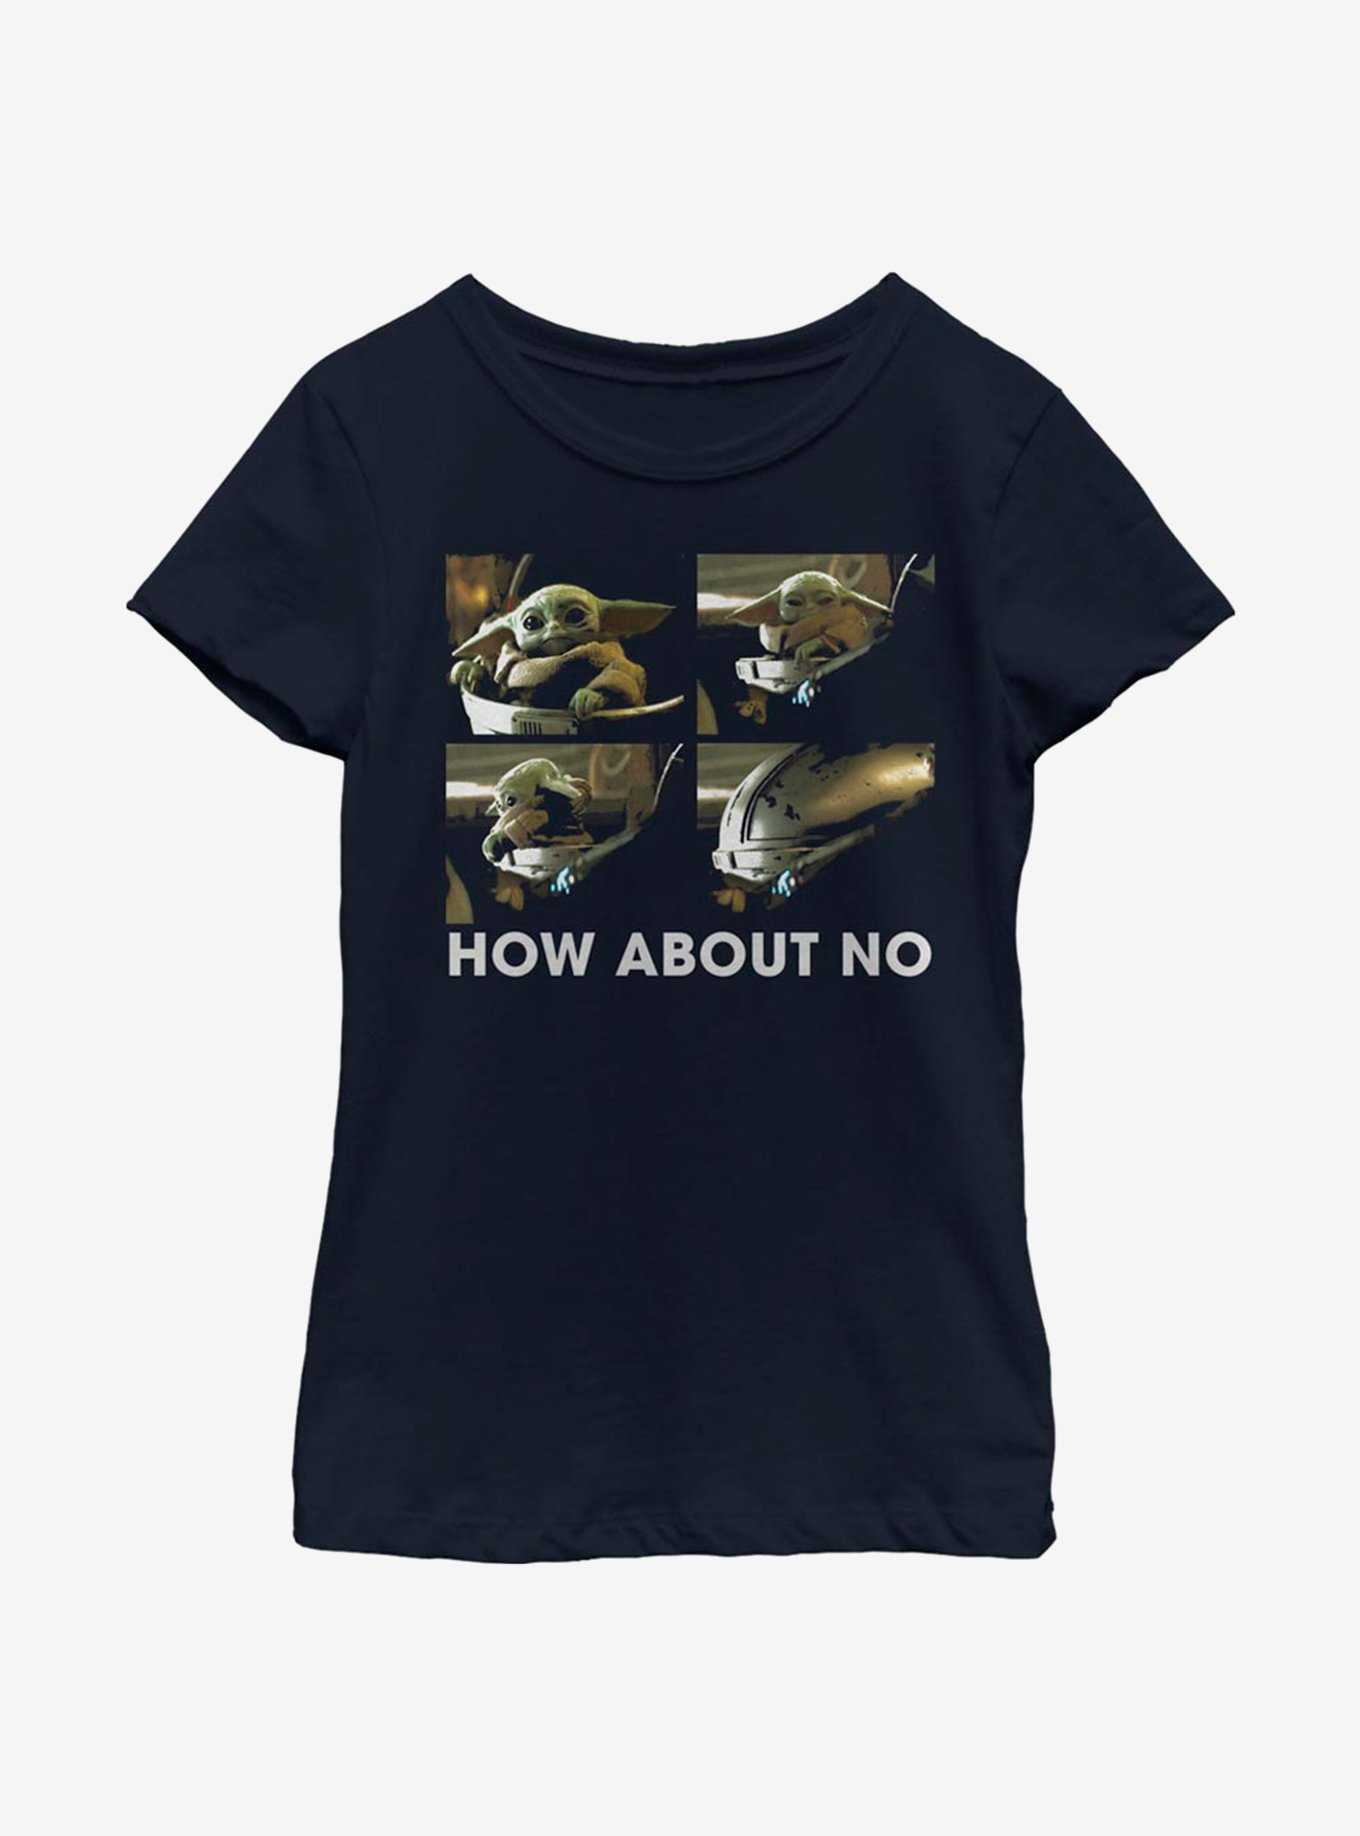 Star Wars The Mandalorian The Child How About No Youth Girls T-Shirt, , hi-res